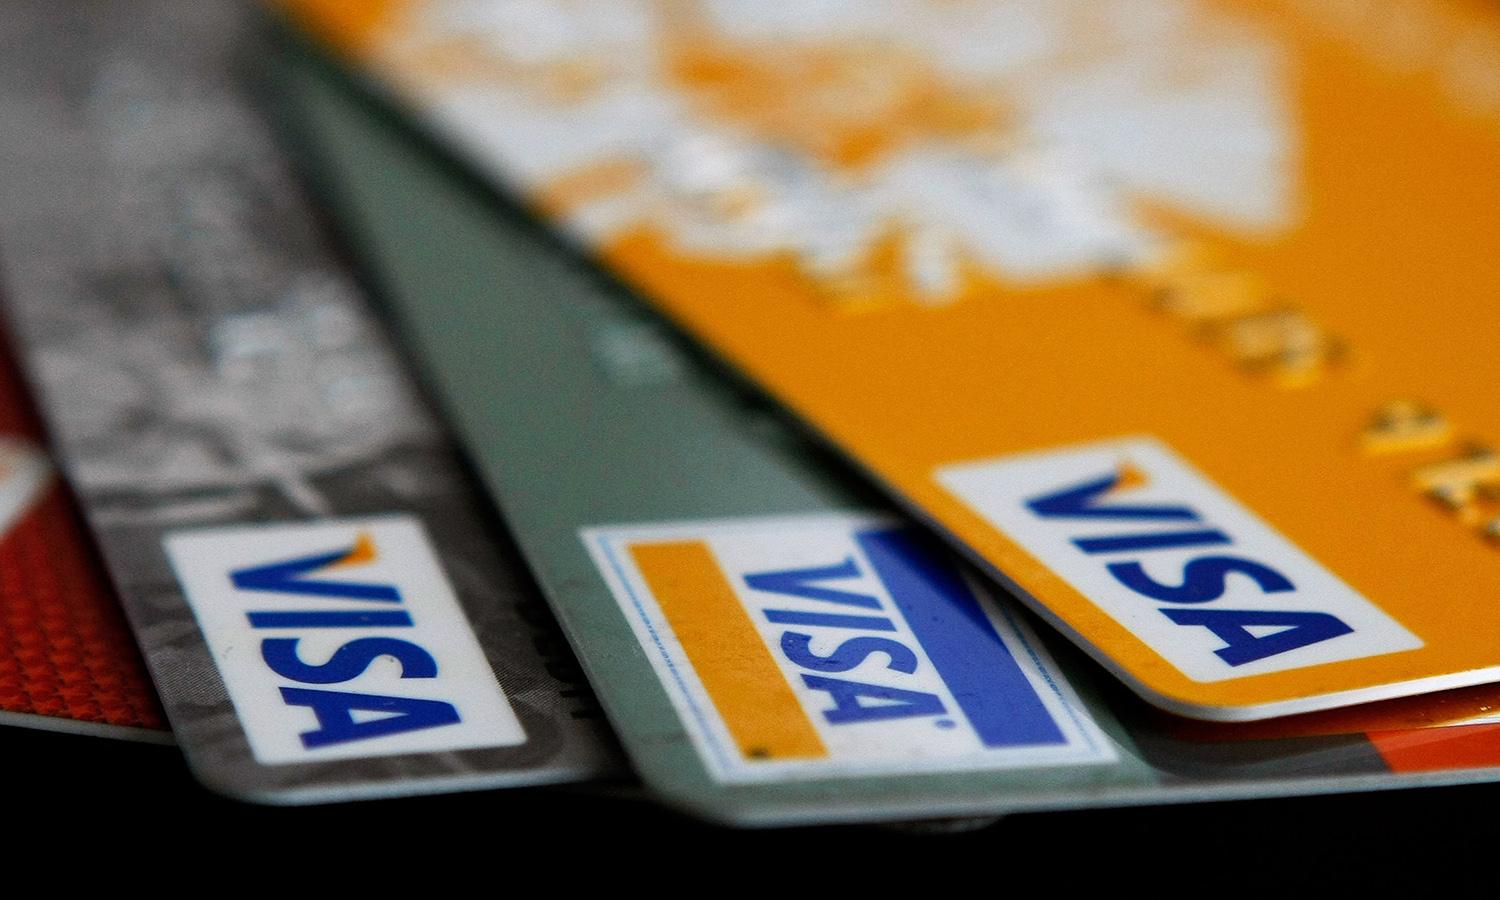 Magecart attacks continue to operate to steal payment data, albeit more covertly, according to Malwarebytes. Pictured: Visa credit cards are arranged on a desk Feb. 25, 2008, in San Francisco. (Photo by Justin Sullivan/Getty Images)